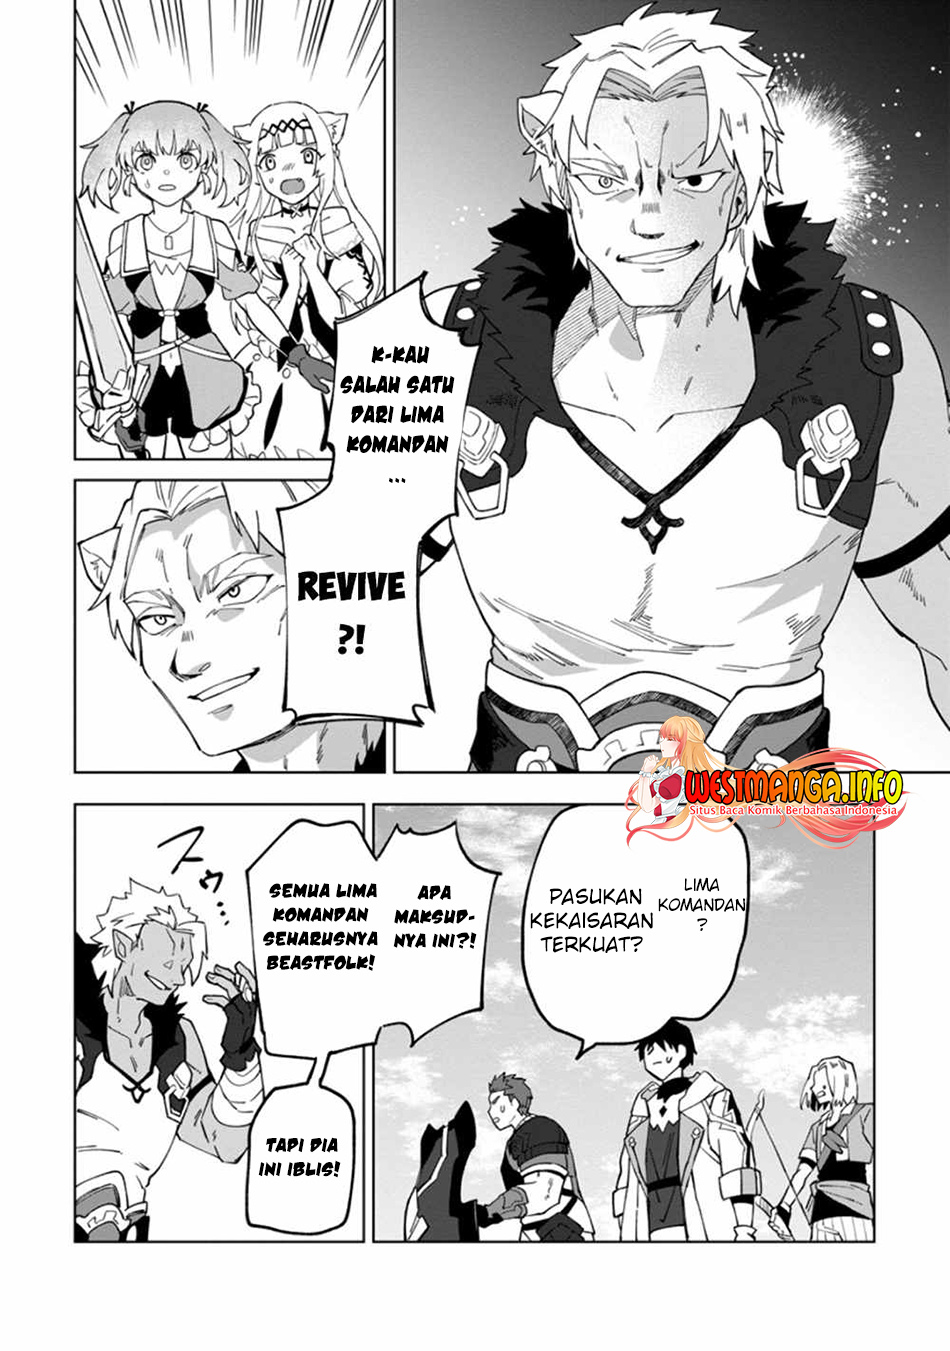 The White Mage Who Was Banished From the Hero’s Party Is Picked up by an S Rank Adventurer ~ This White Mage Is Too Out of the Ordinary! Chapter 15